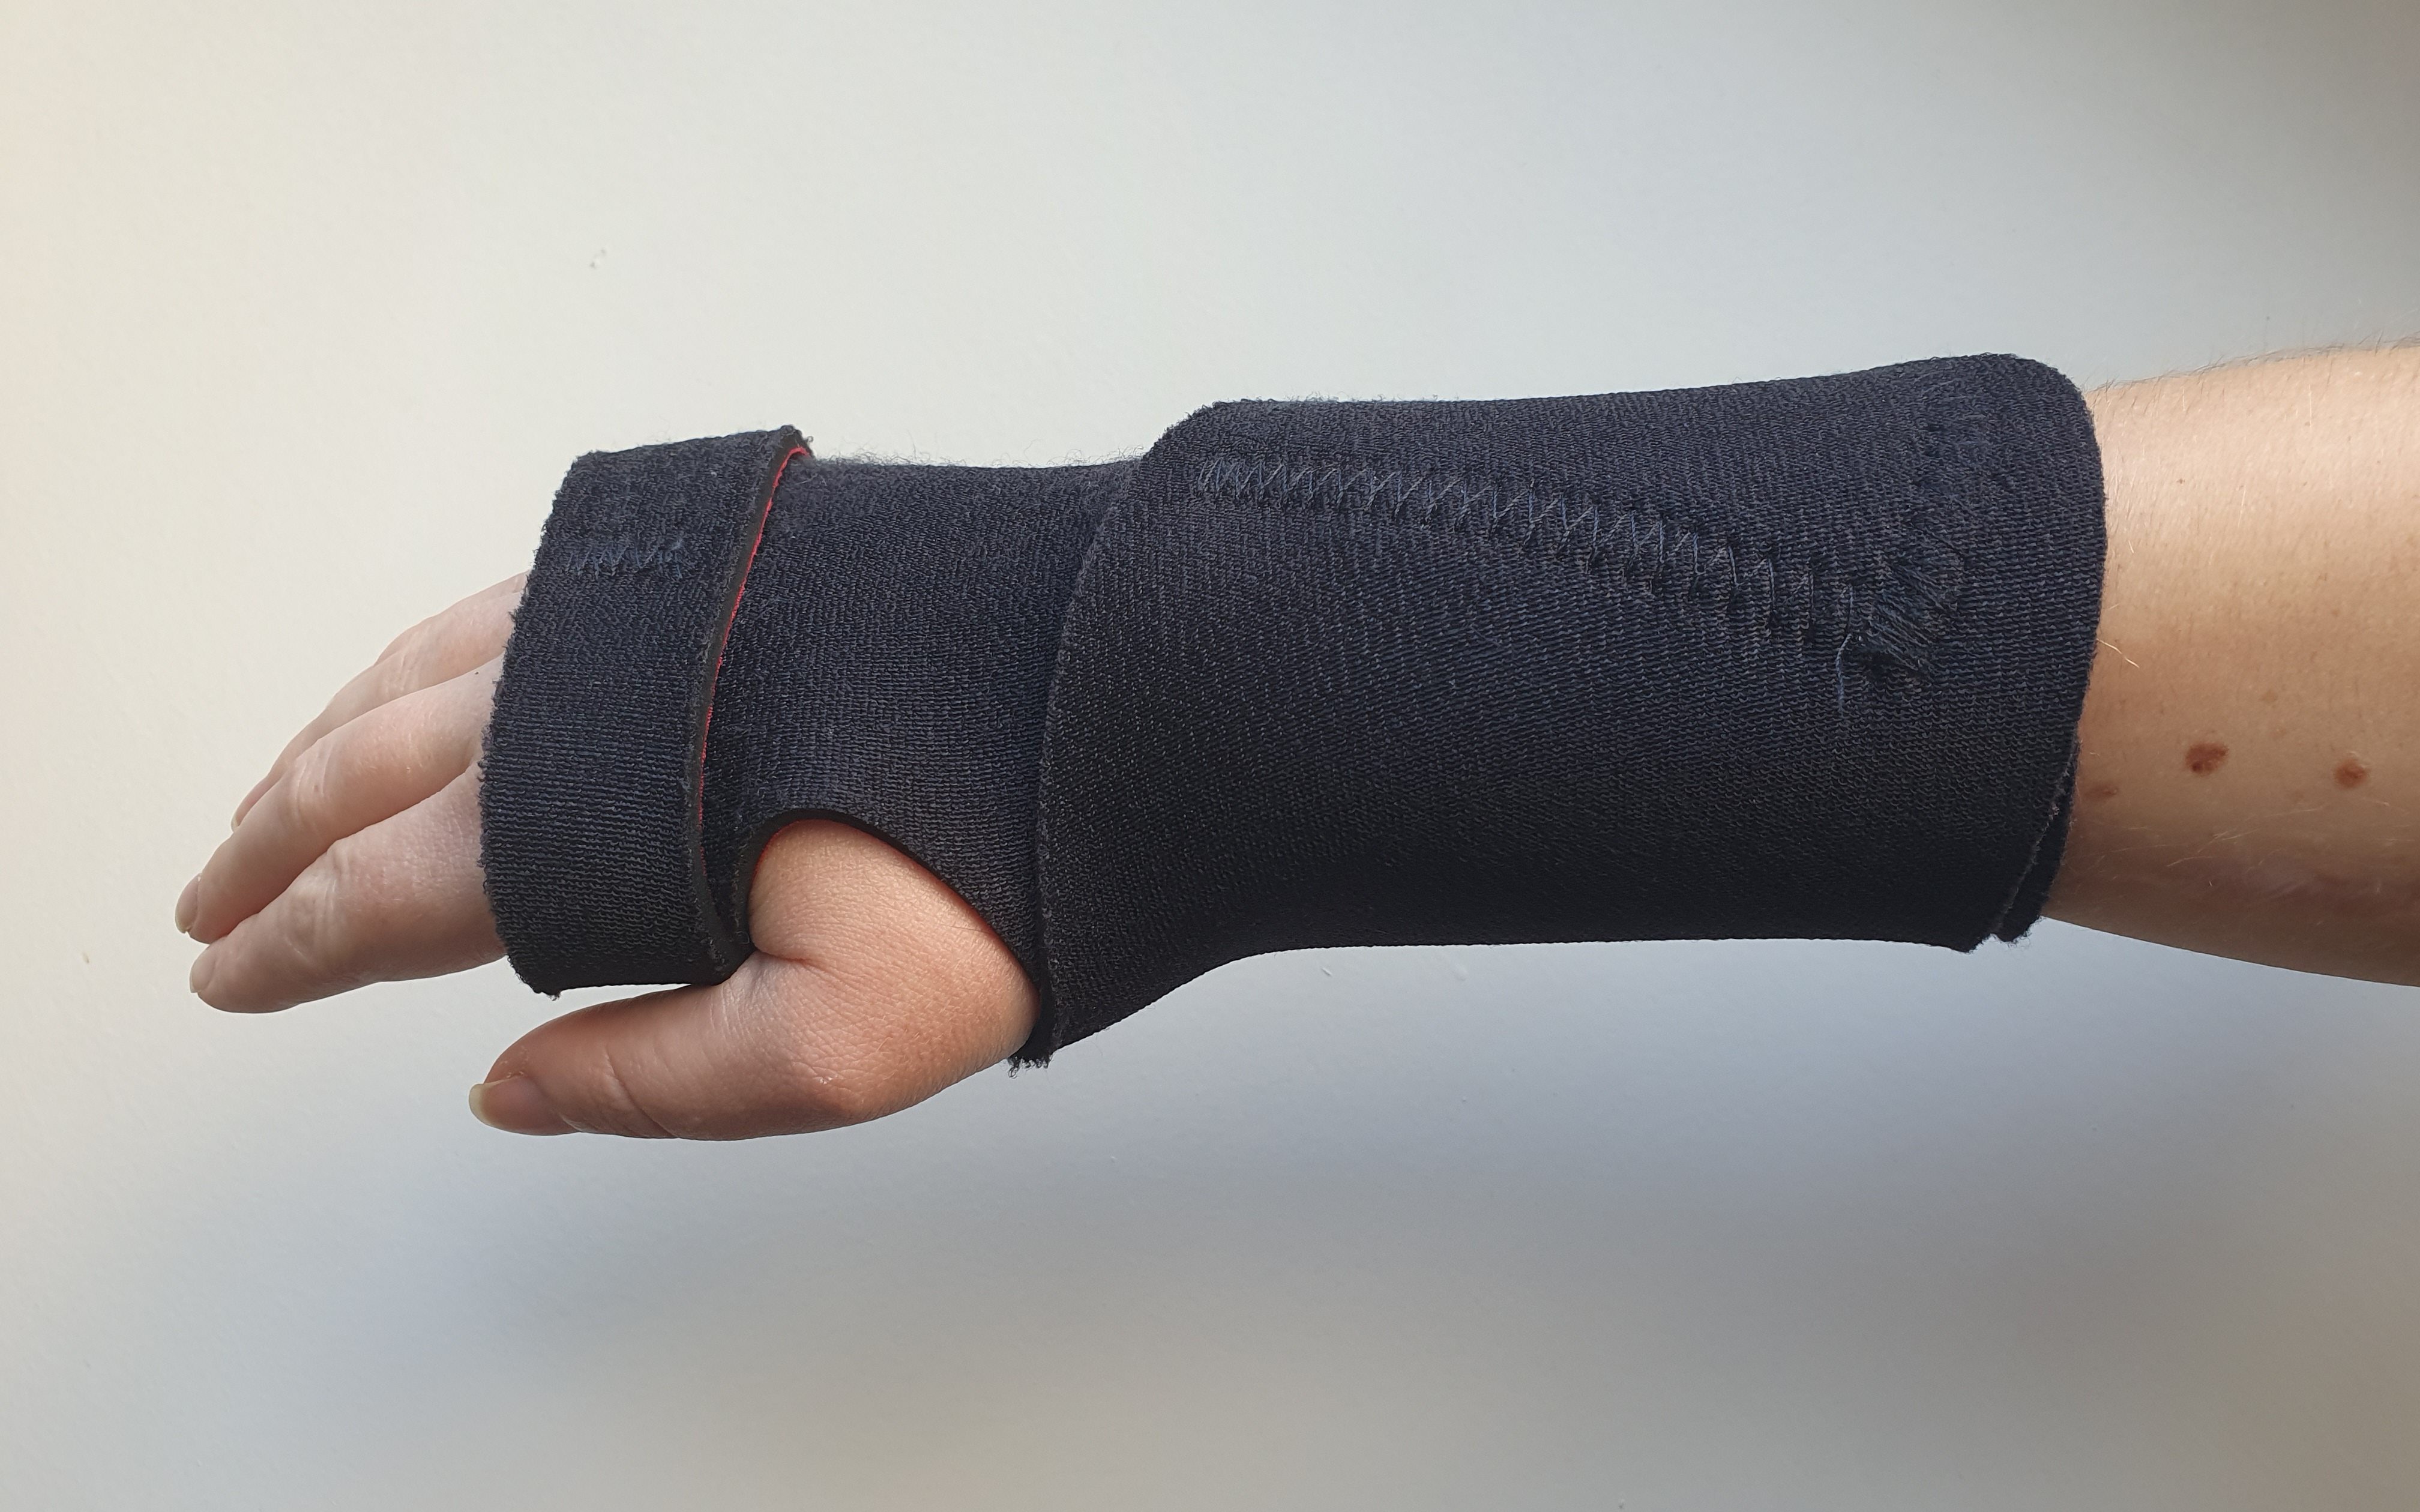 Neoprene wrist splint secured across the back of the hand and wrist by velcro straps